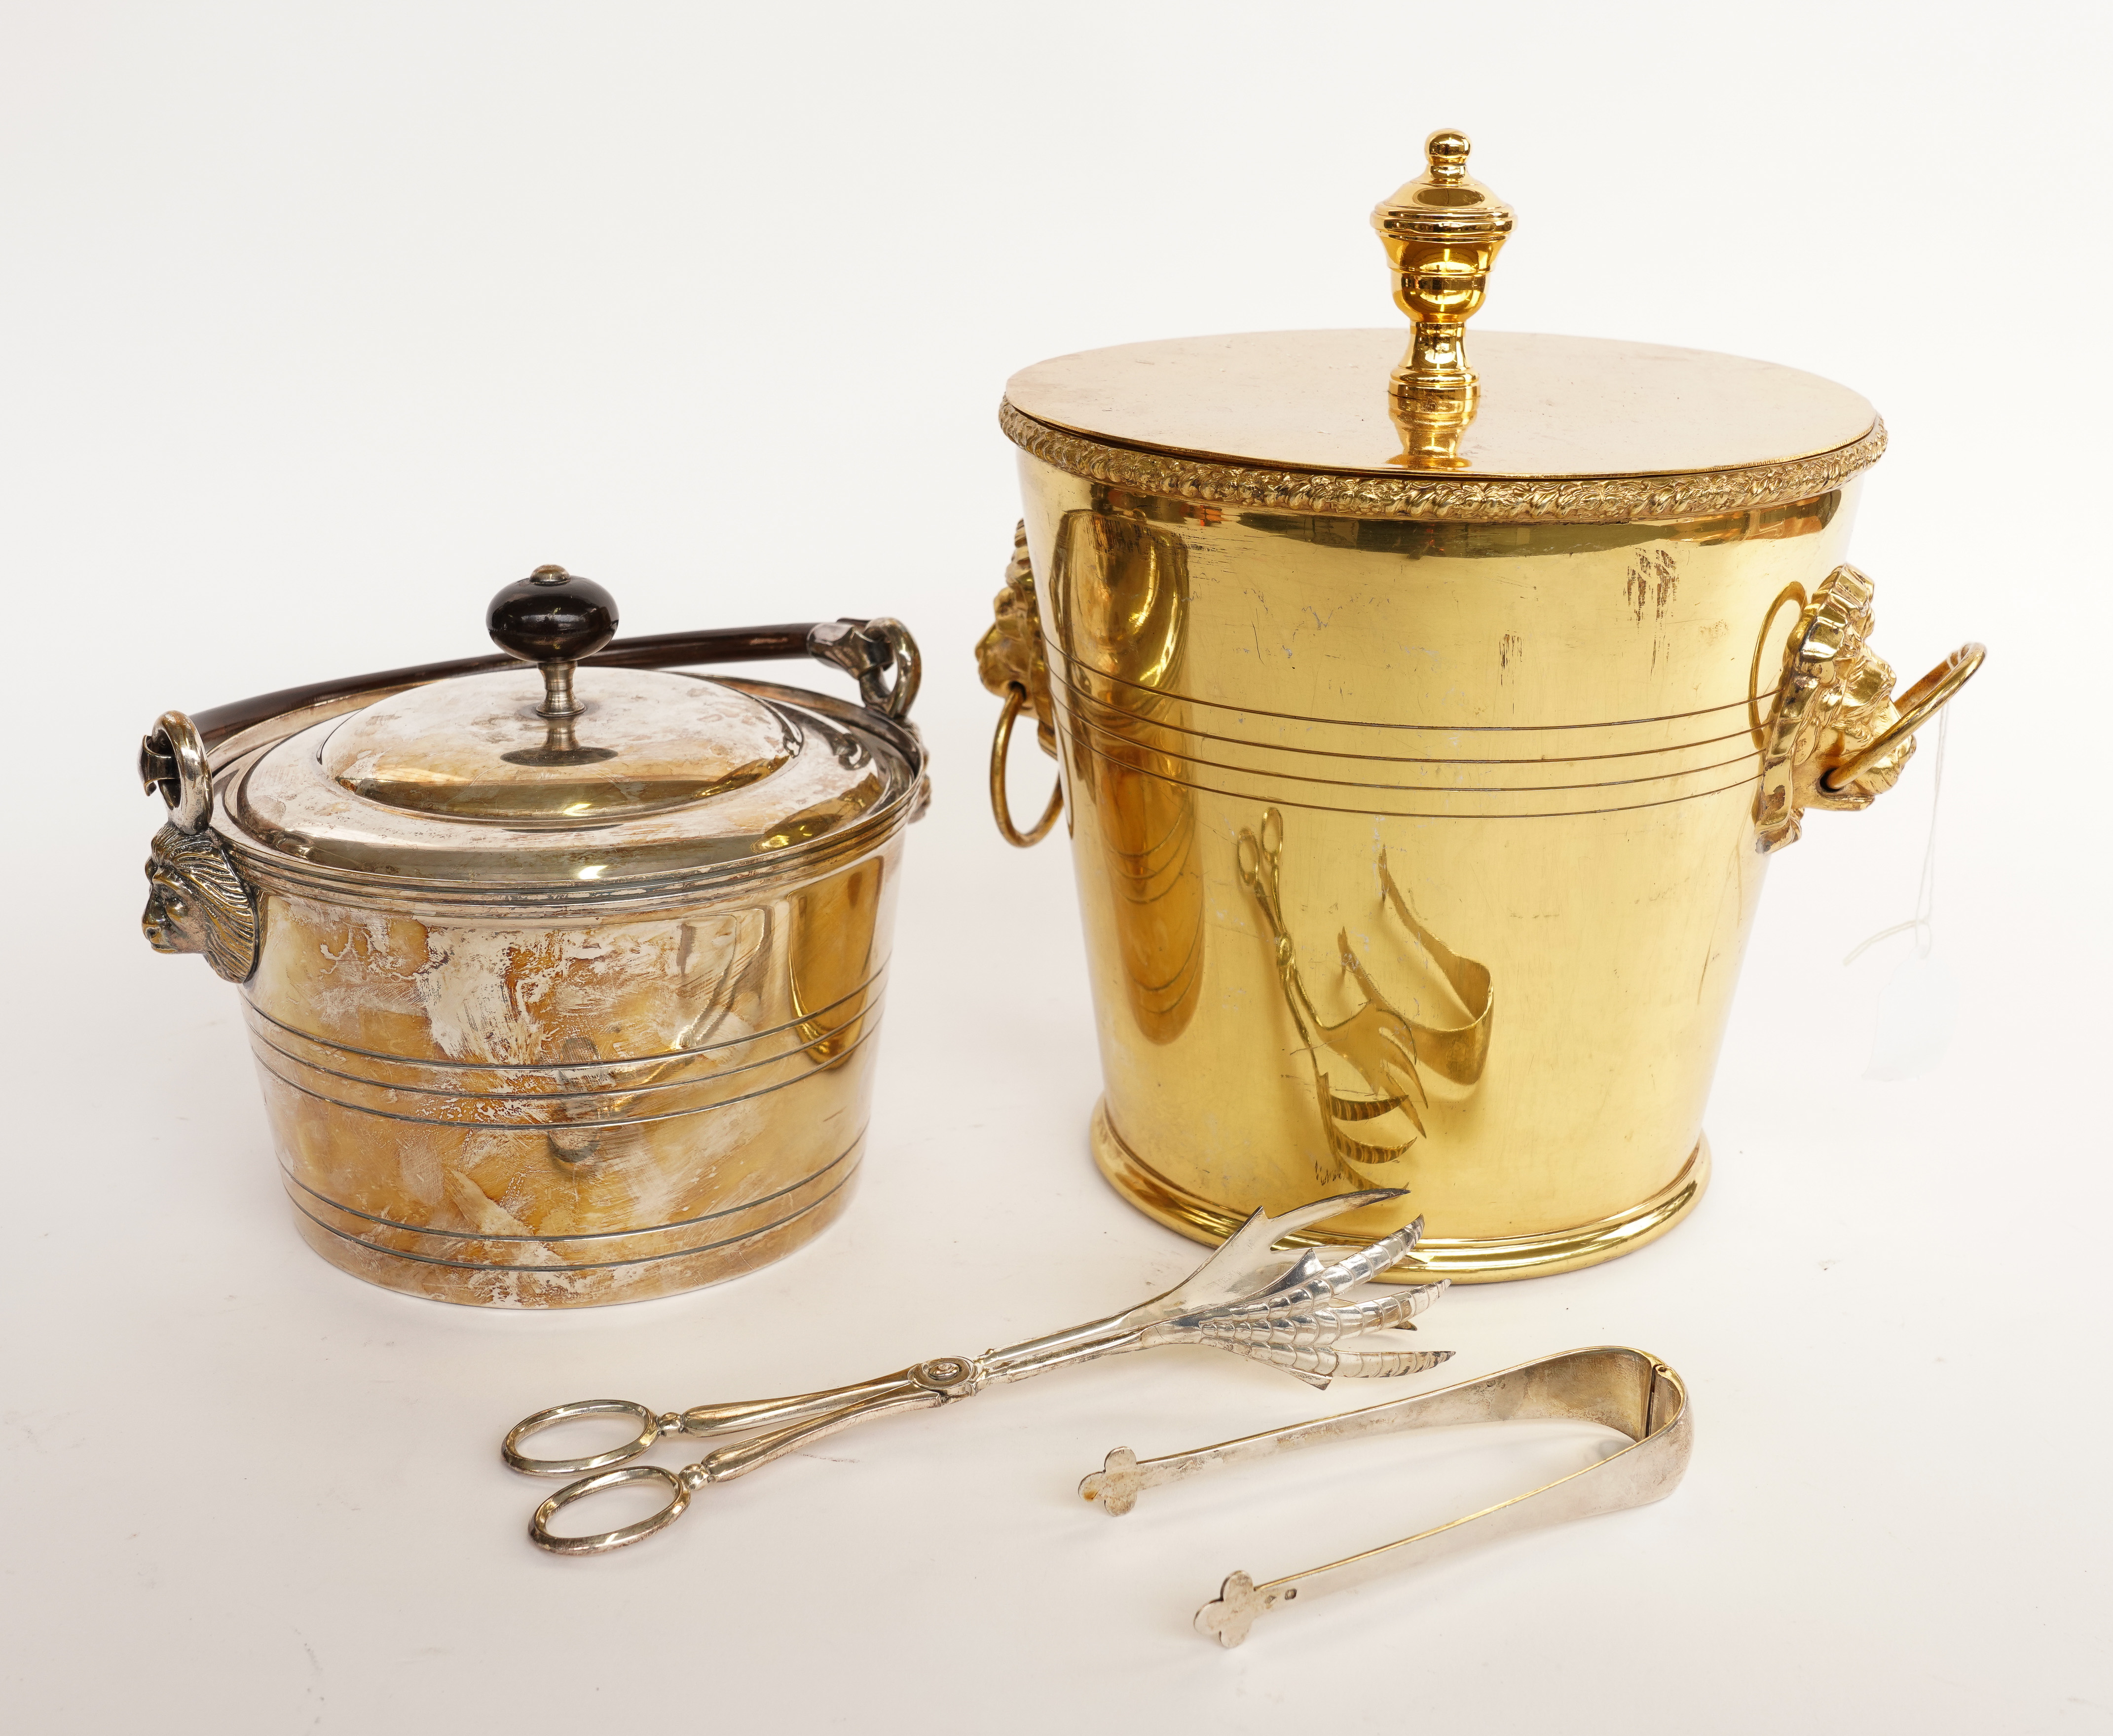 VALENTI: A SPANISH SILVER-PLATED ICE BUCKET AND ANOTHER GILT-METAL ICE BUCKET, WITH FRENCH SILVER ODIOT ICE TONGS  (4)